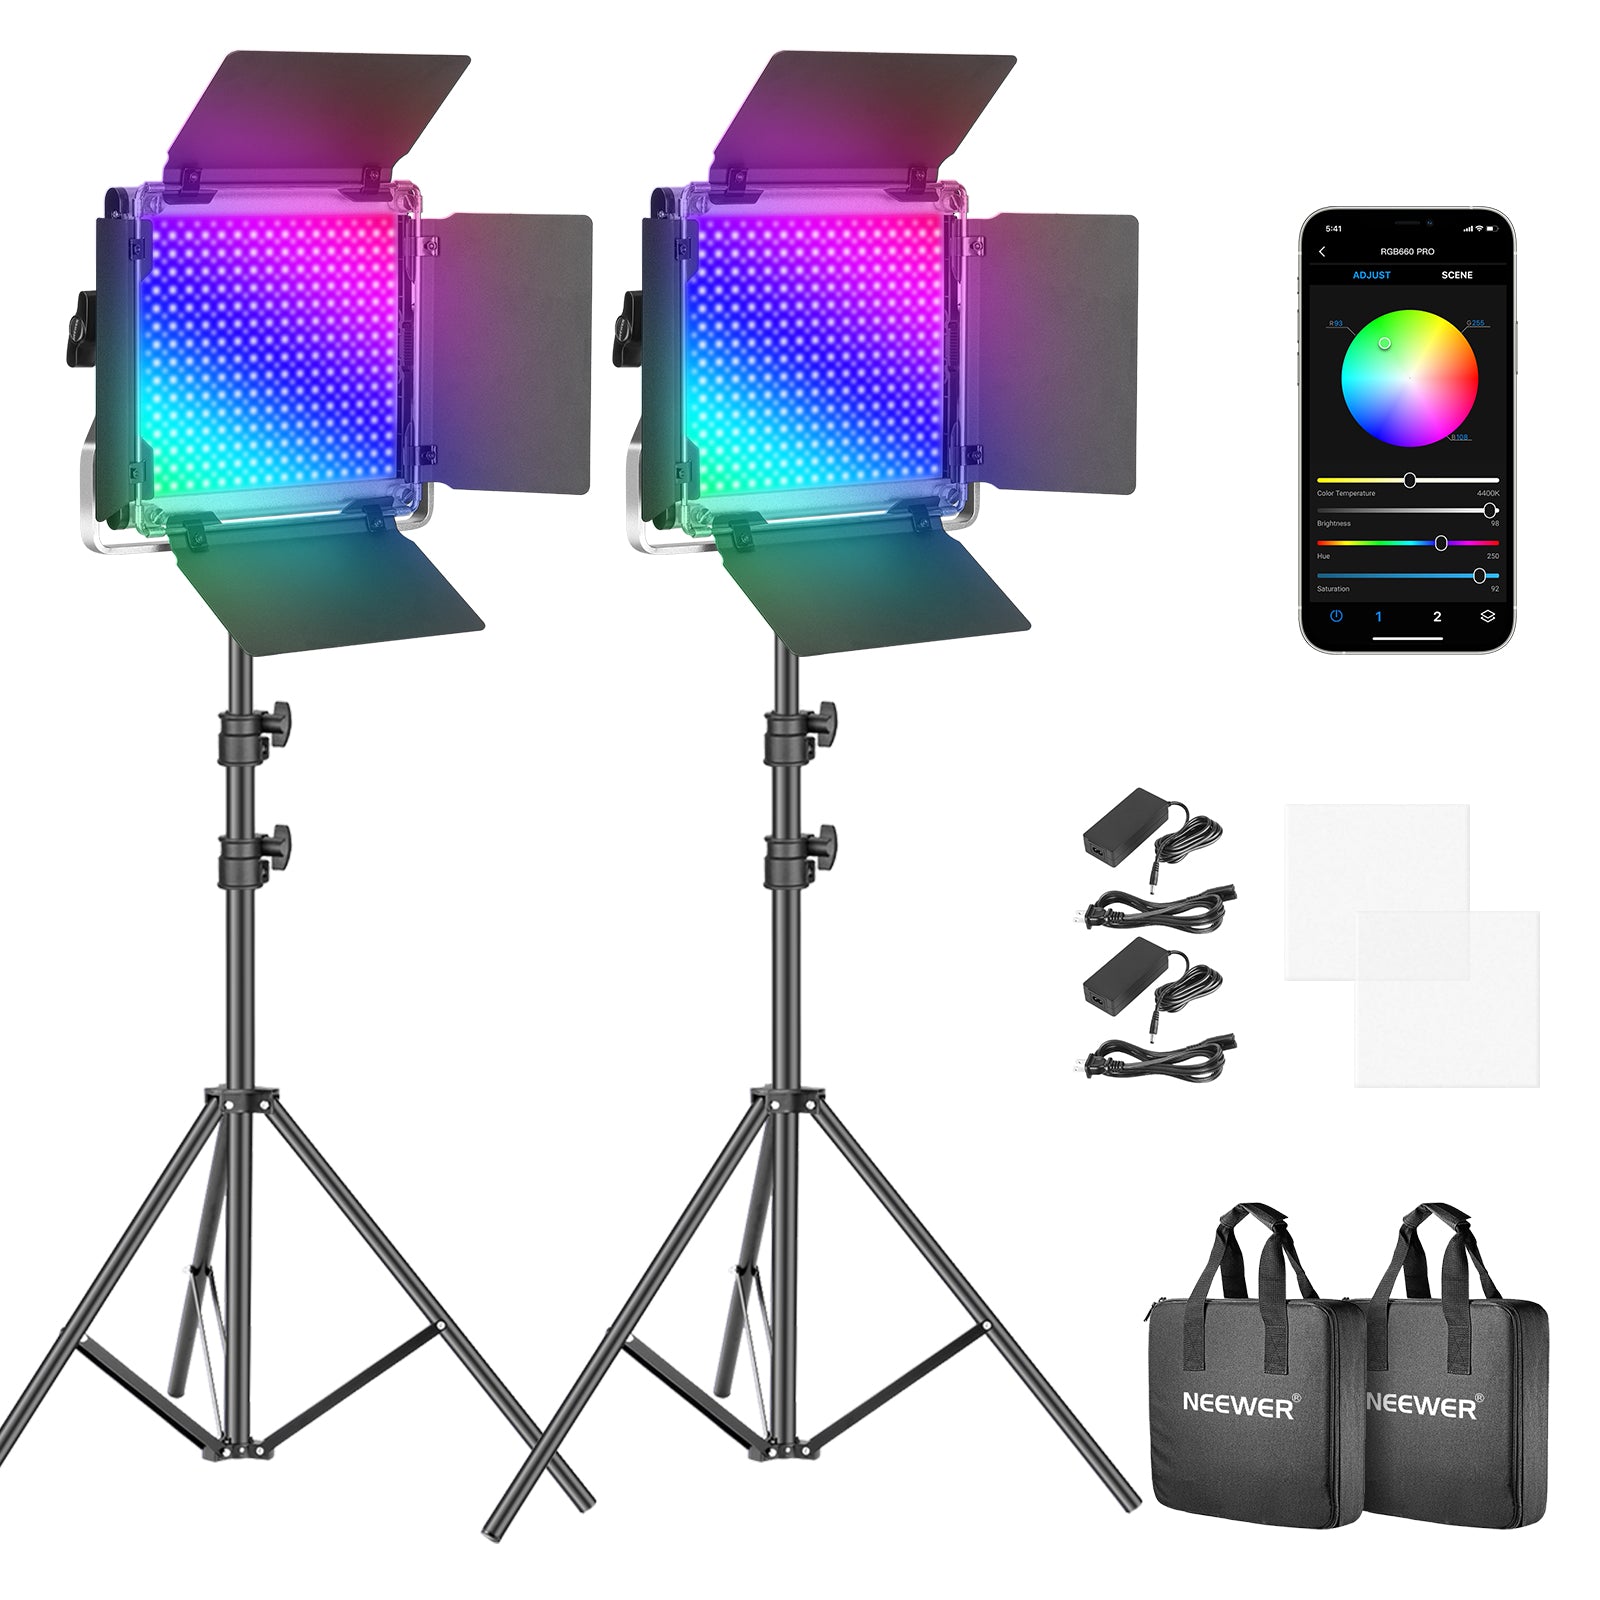 Neewer 660 RGB Led Light with APP Control, Photography Video Lighting Kit  with Stands and Bag, 660 SMD LEDs CRI95